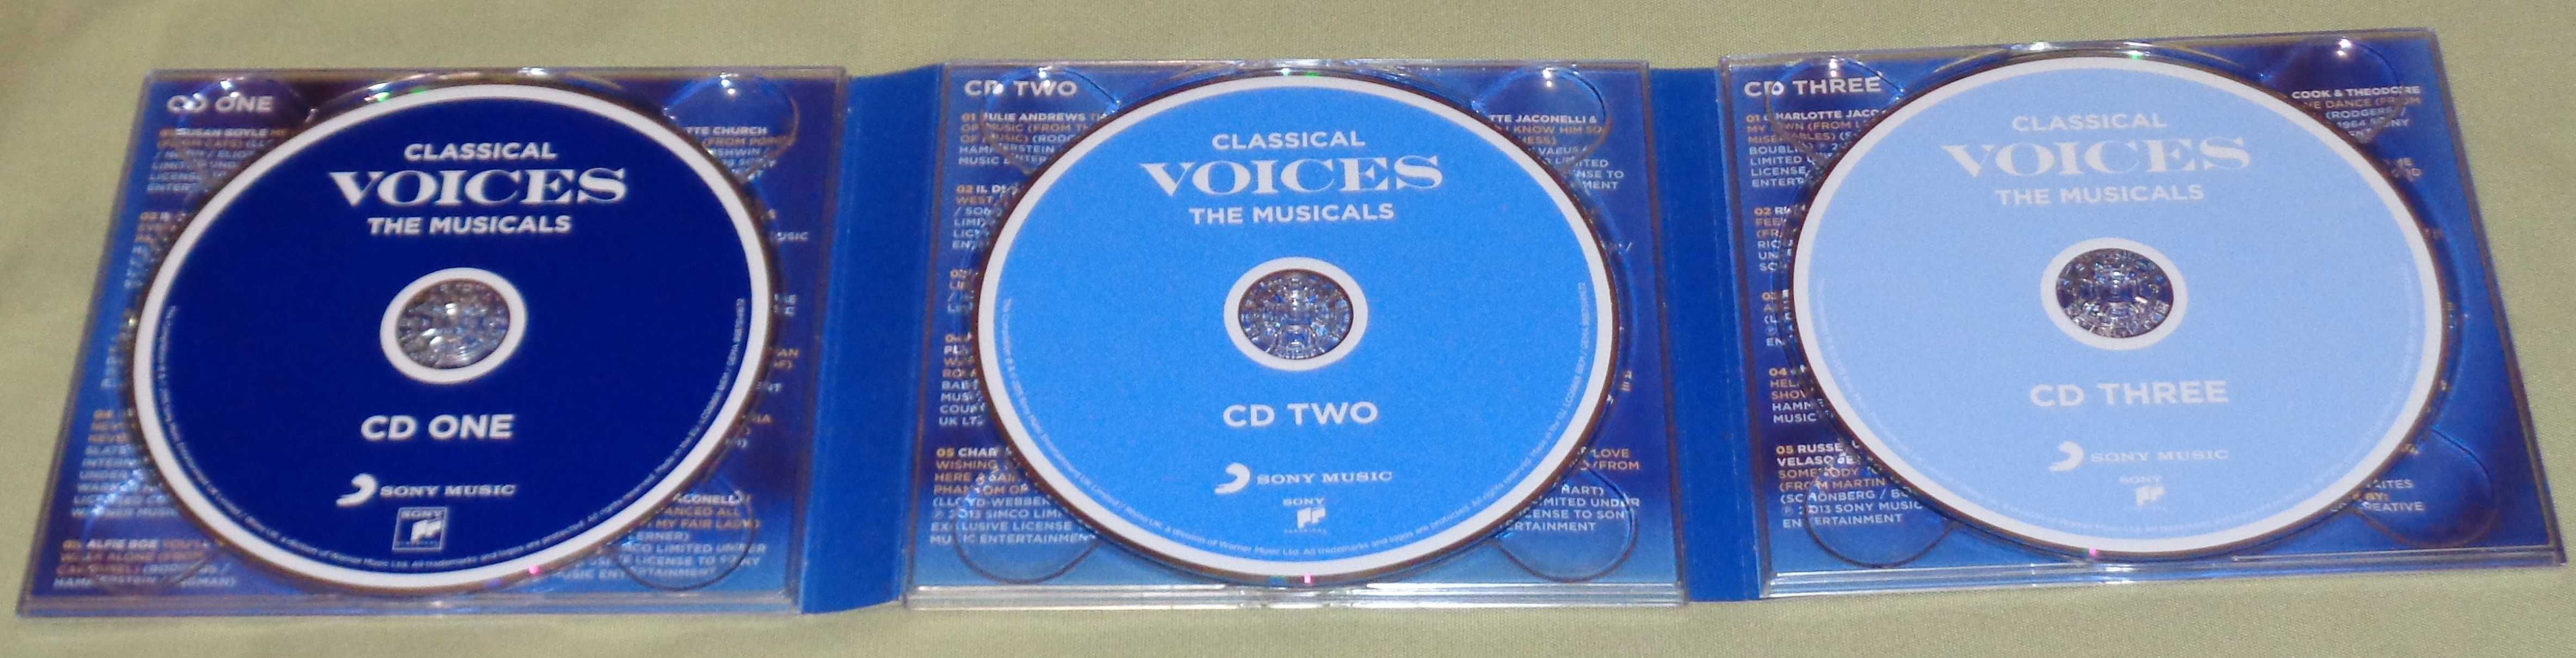 CD triplo Classical Voices The Musicals